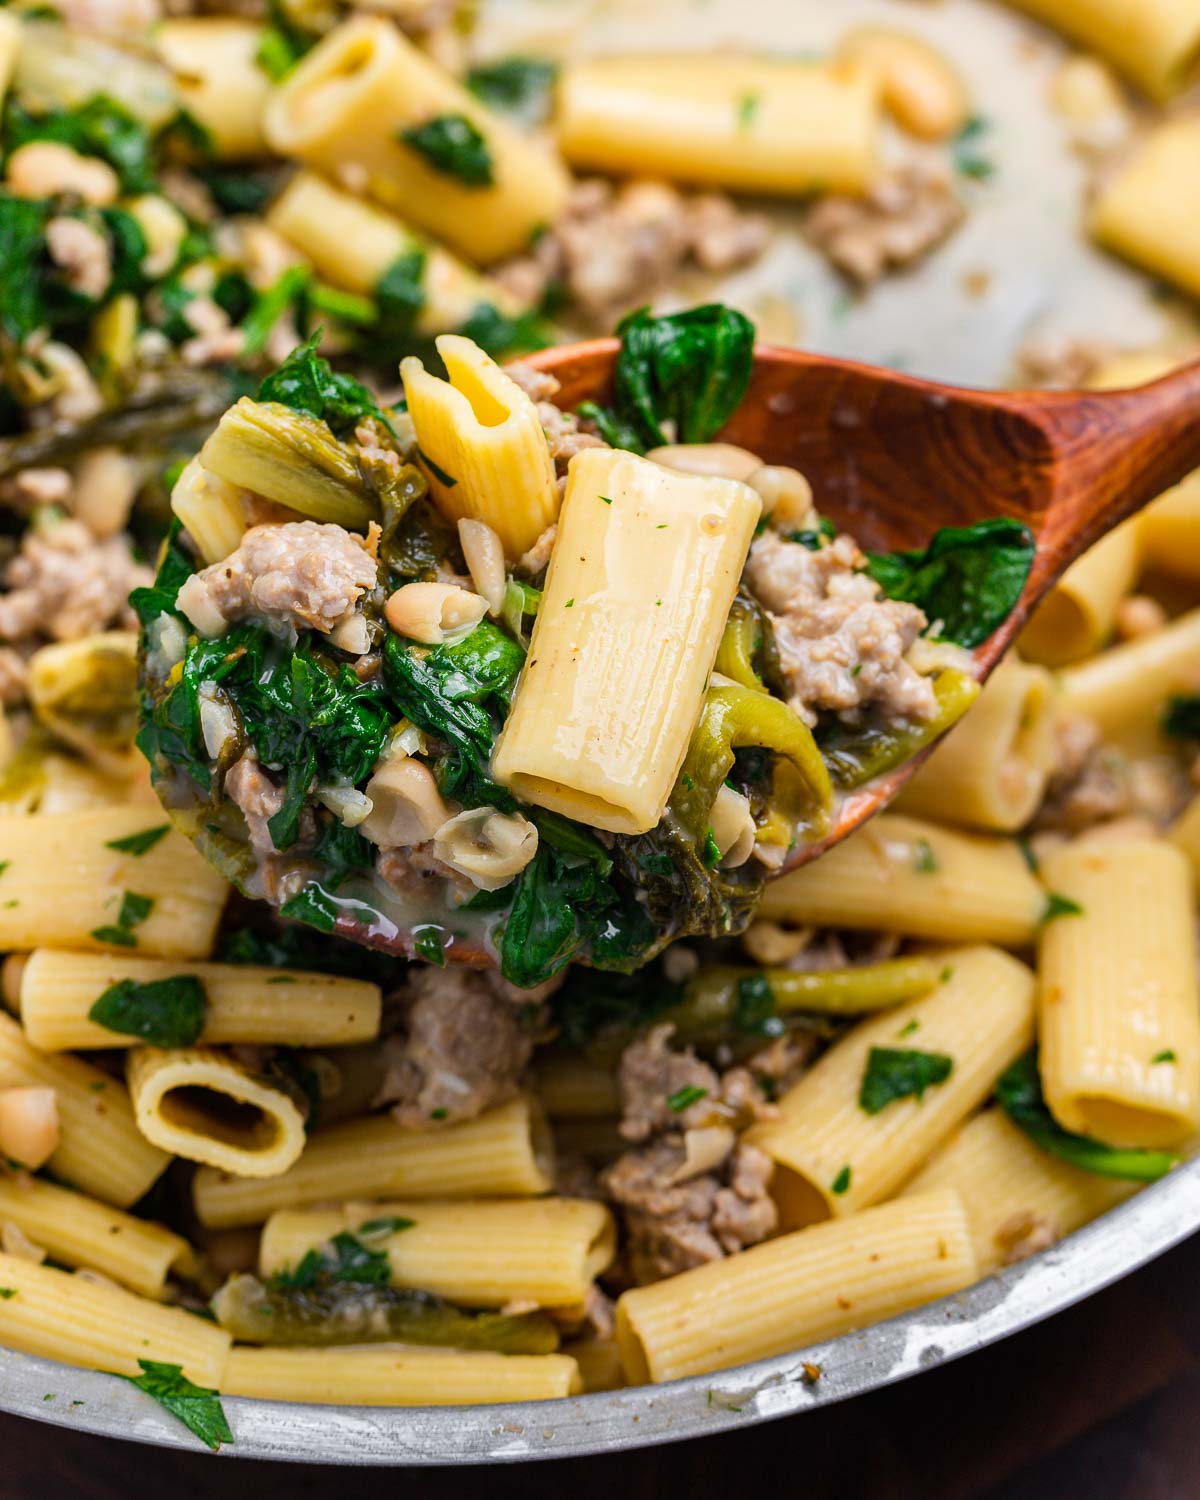 Large wooden ladle holding rigatoni with beans and greens.